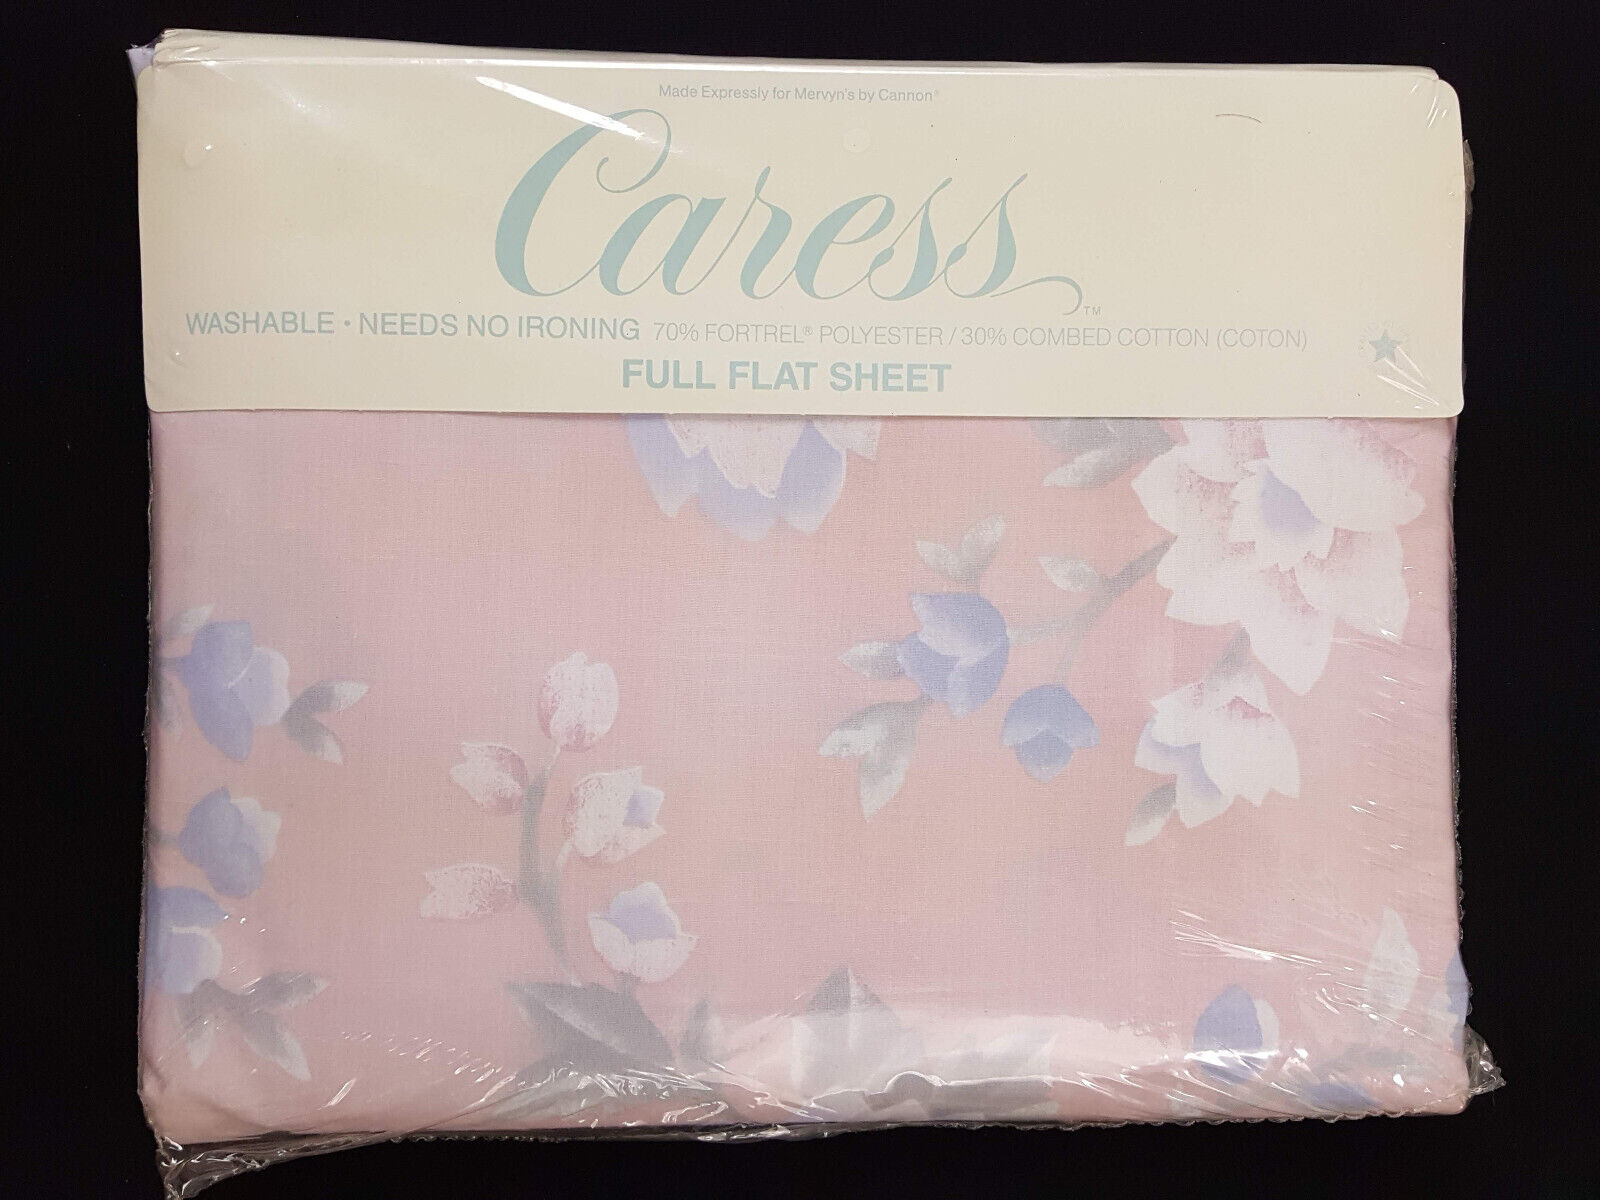 New Vintage Caress Full Flat Sheet Pink With White Flowers Bedroom Decor